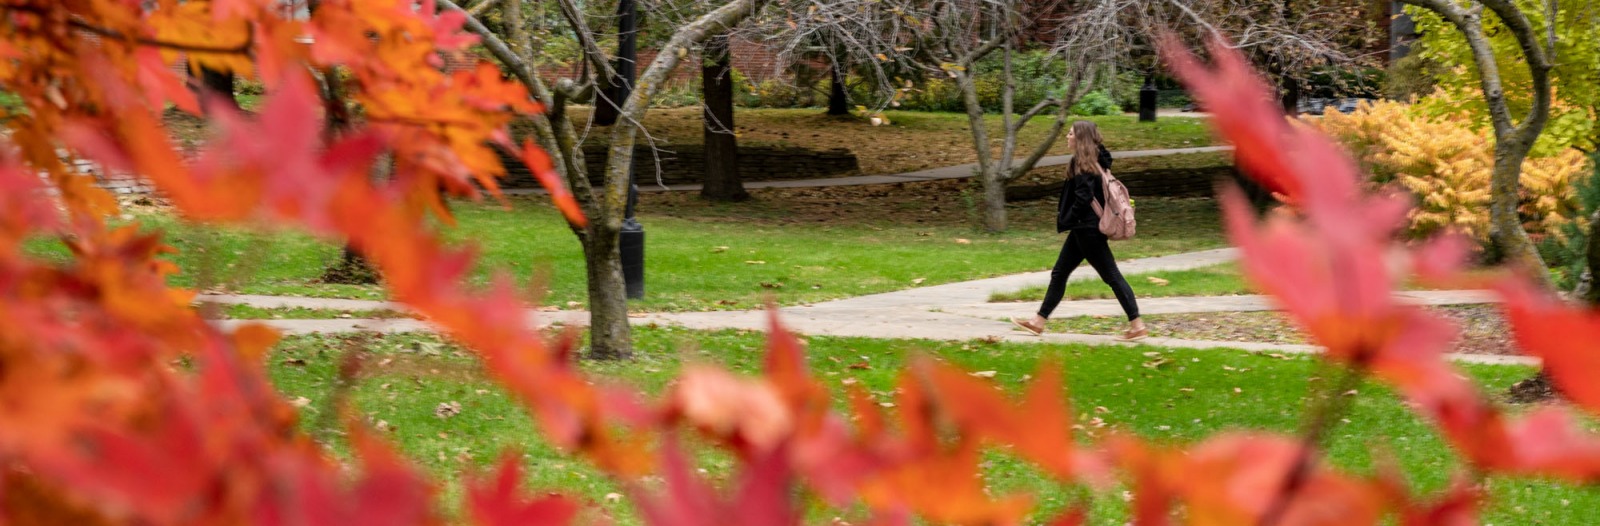 Students walk on campus with colorful fall leaves